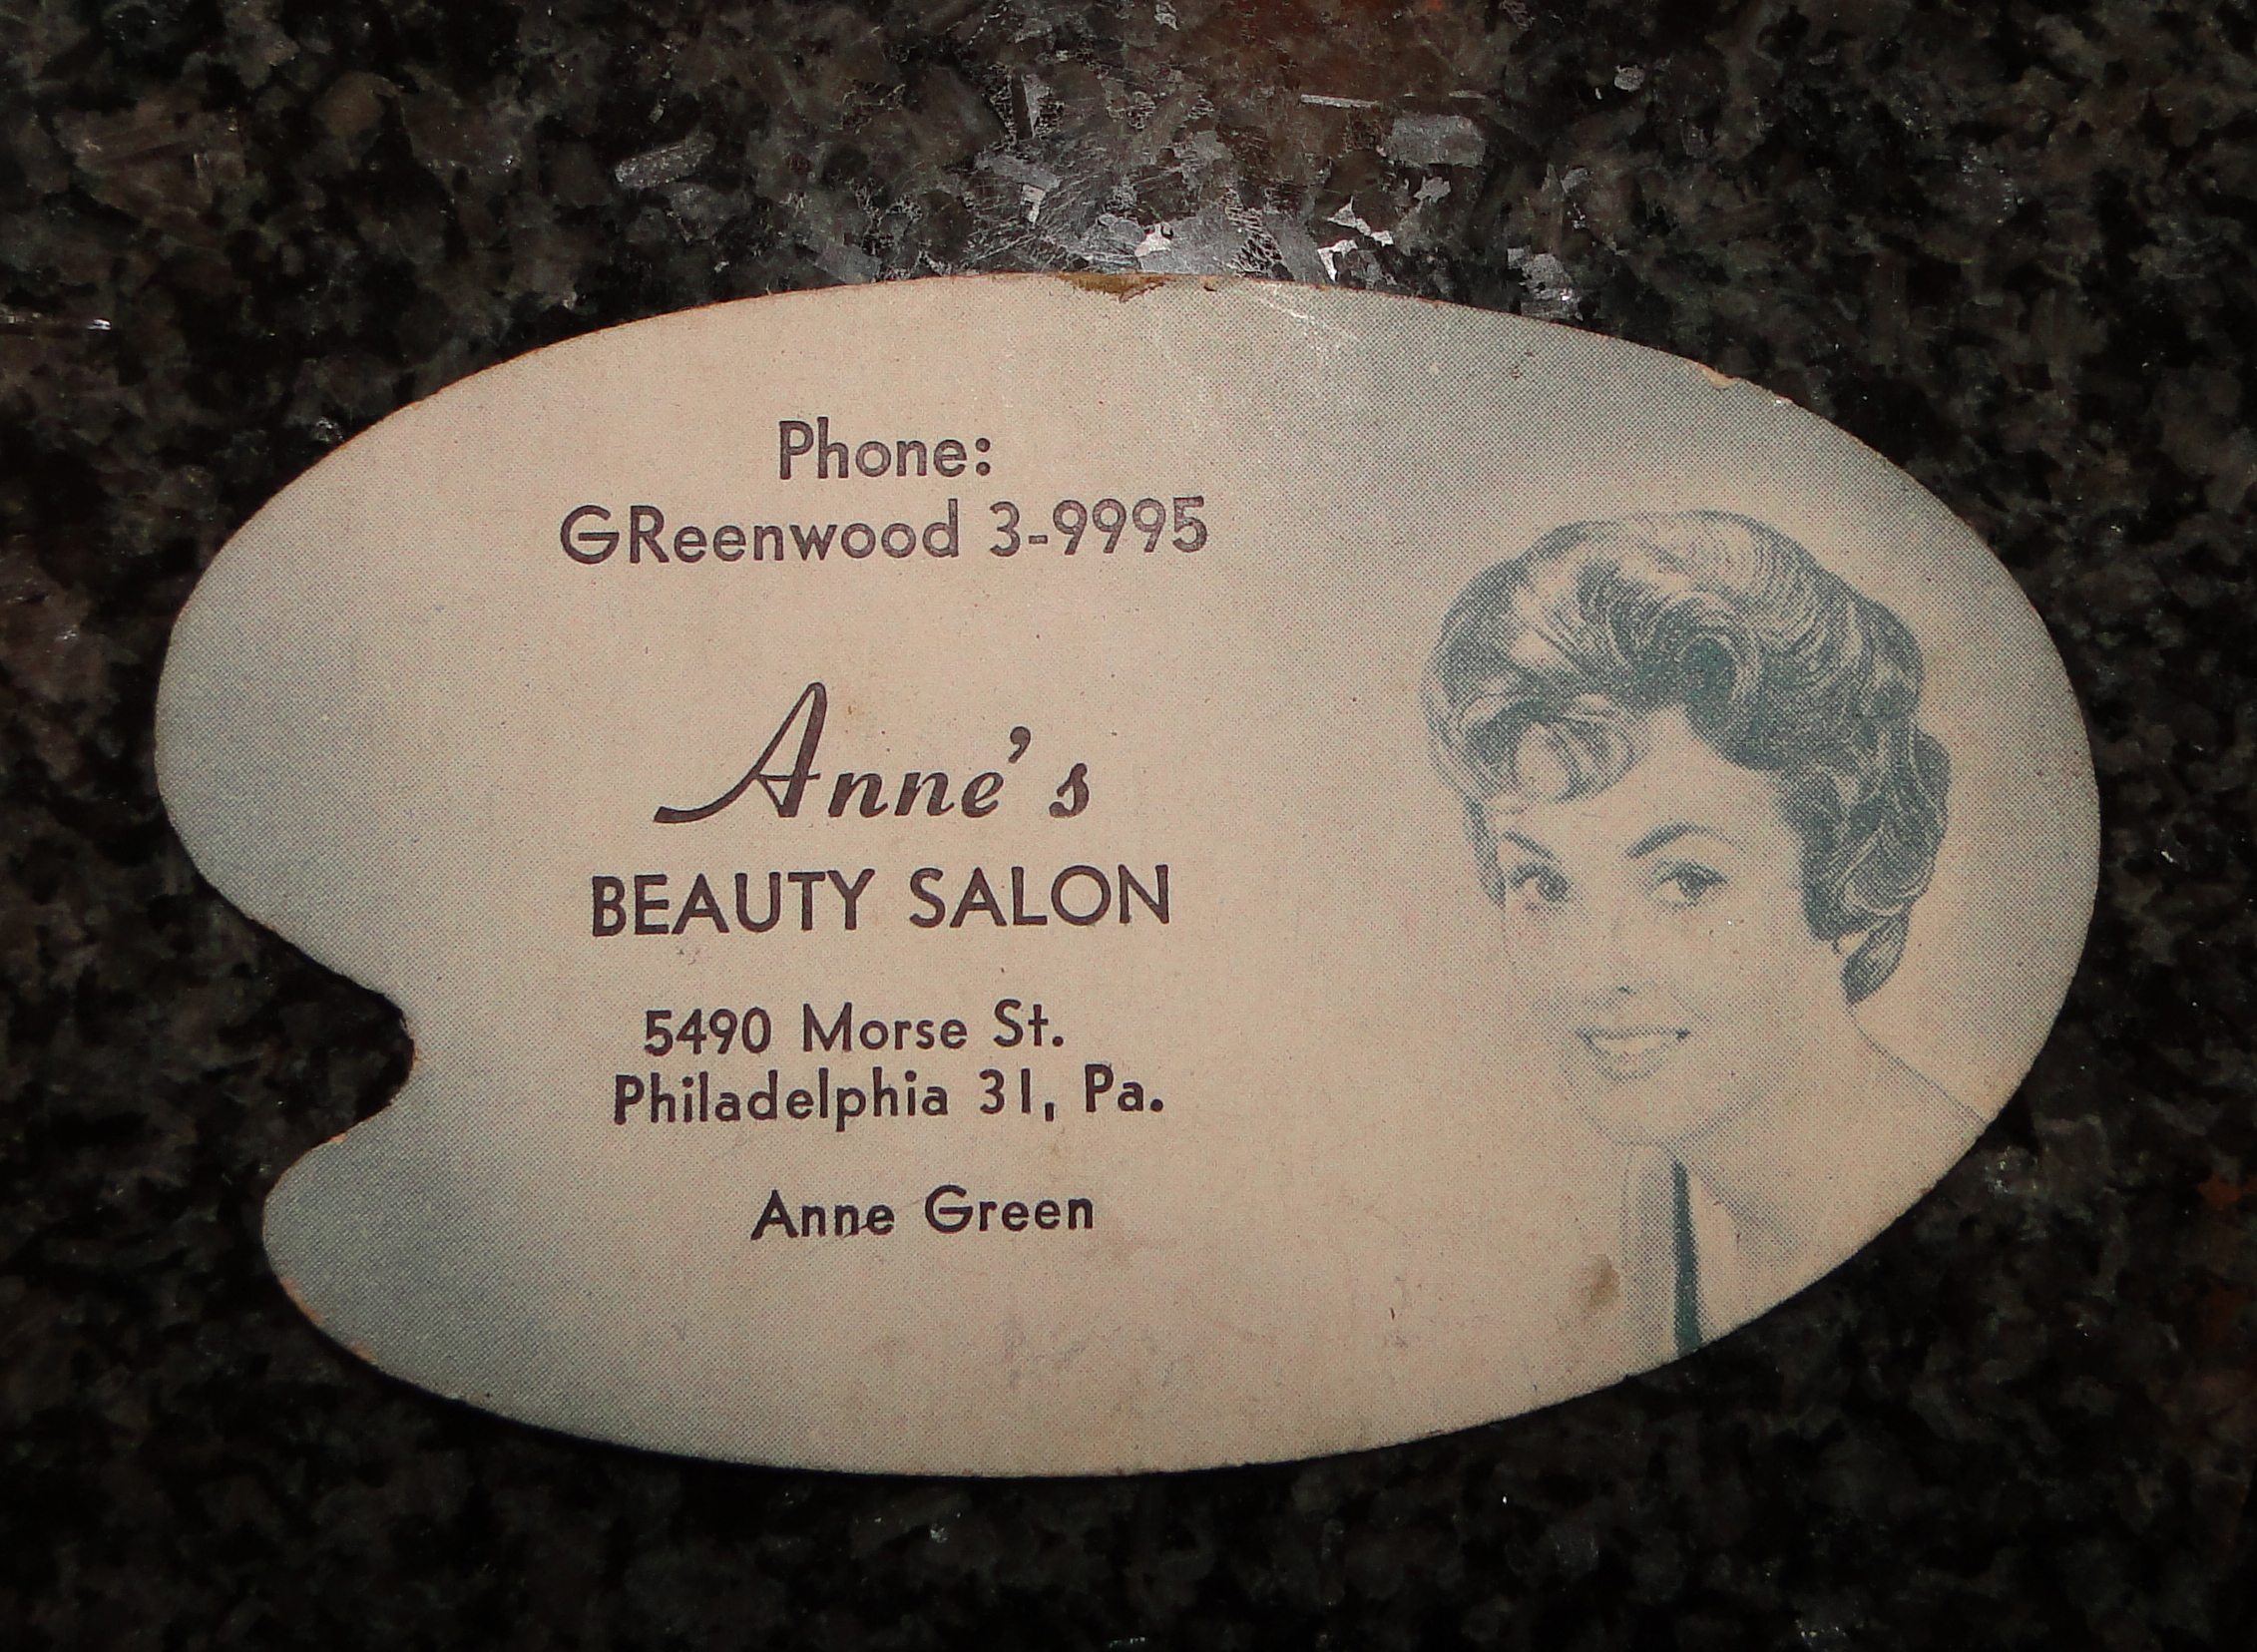 Beauty Parlor Appointment Card found inside dresser